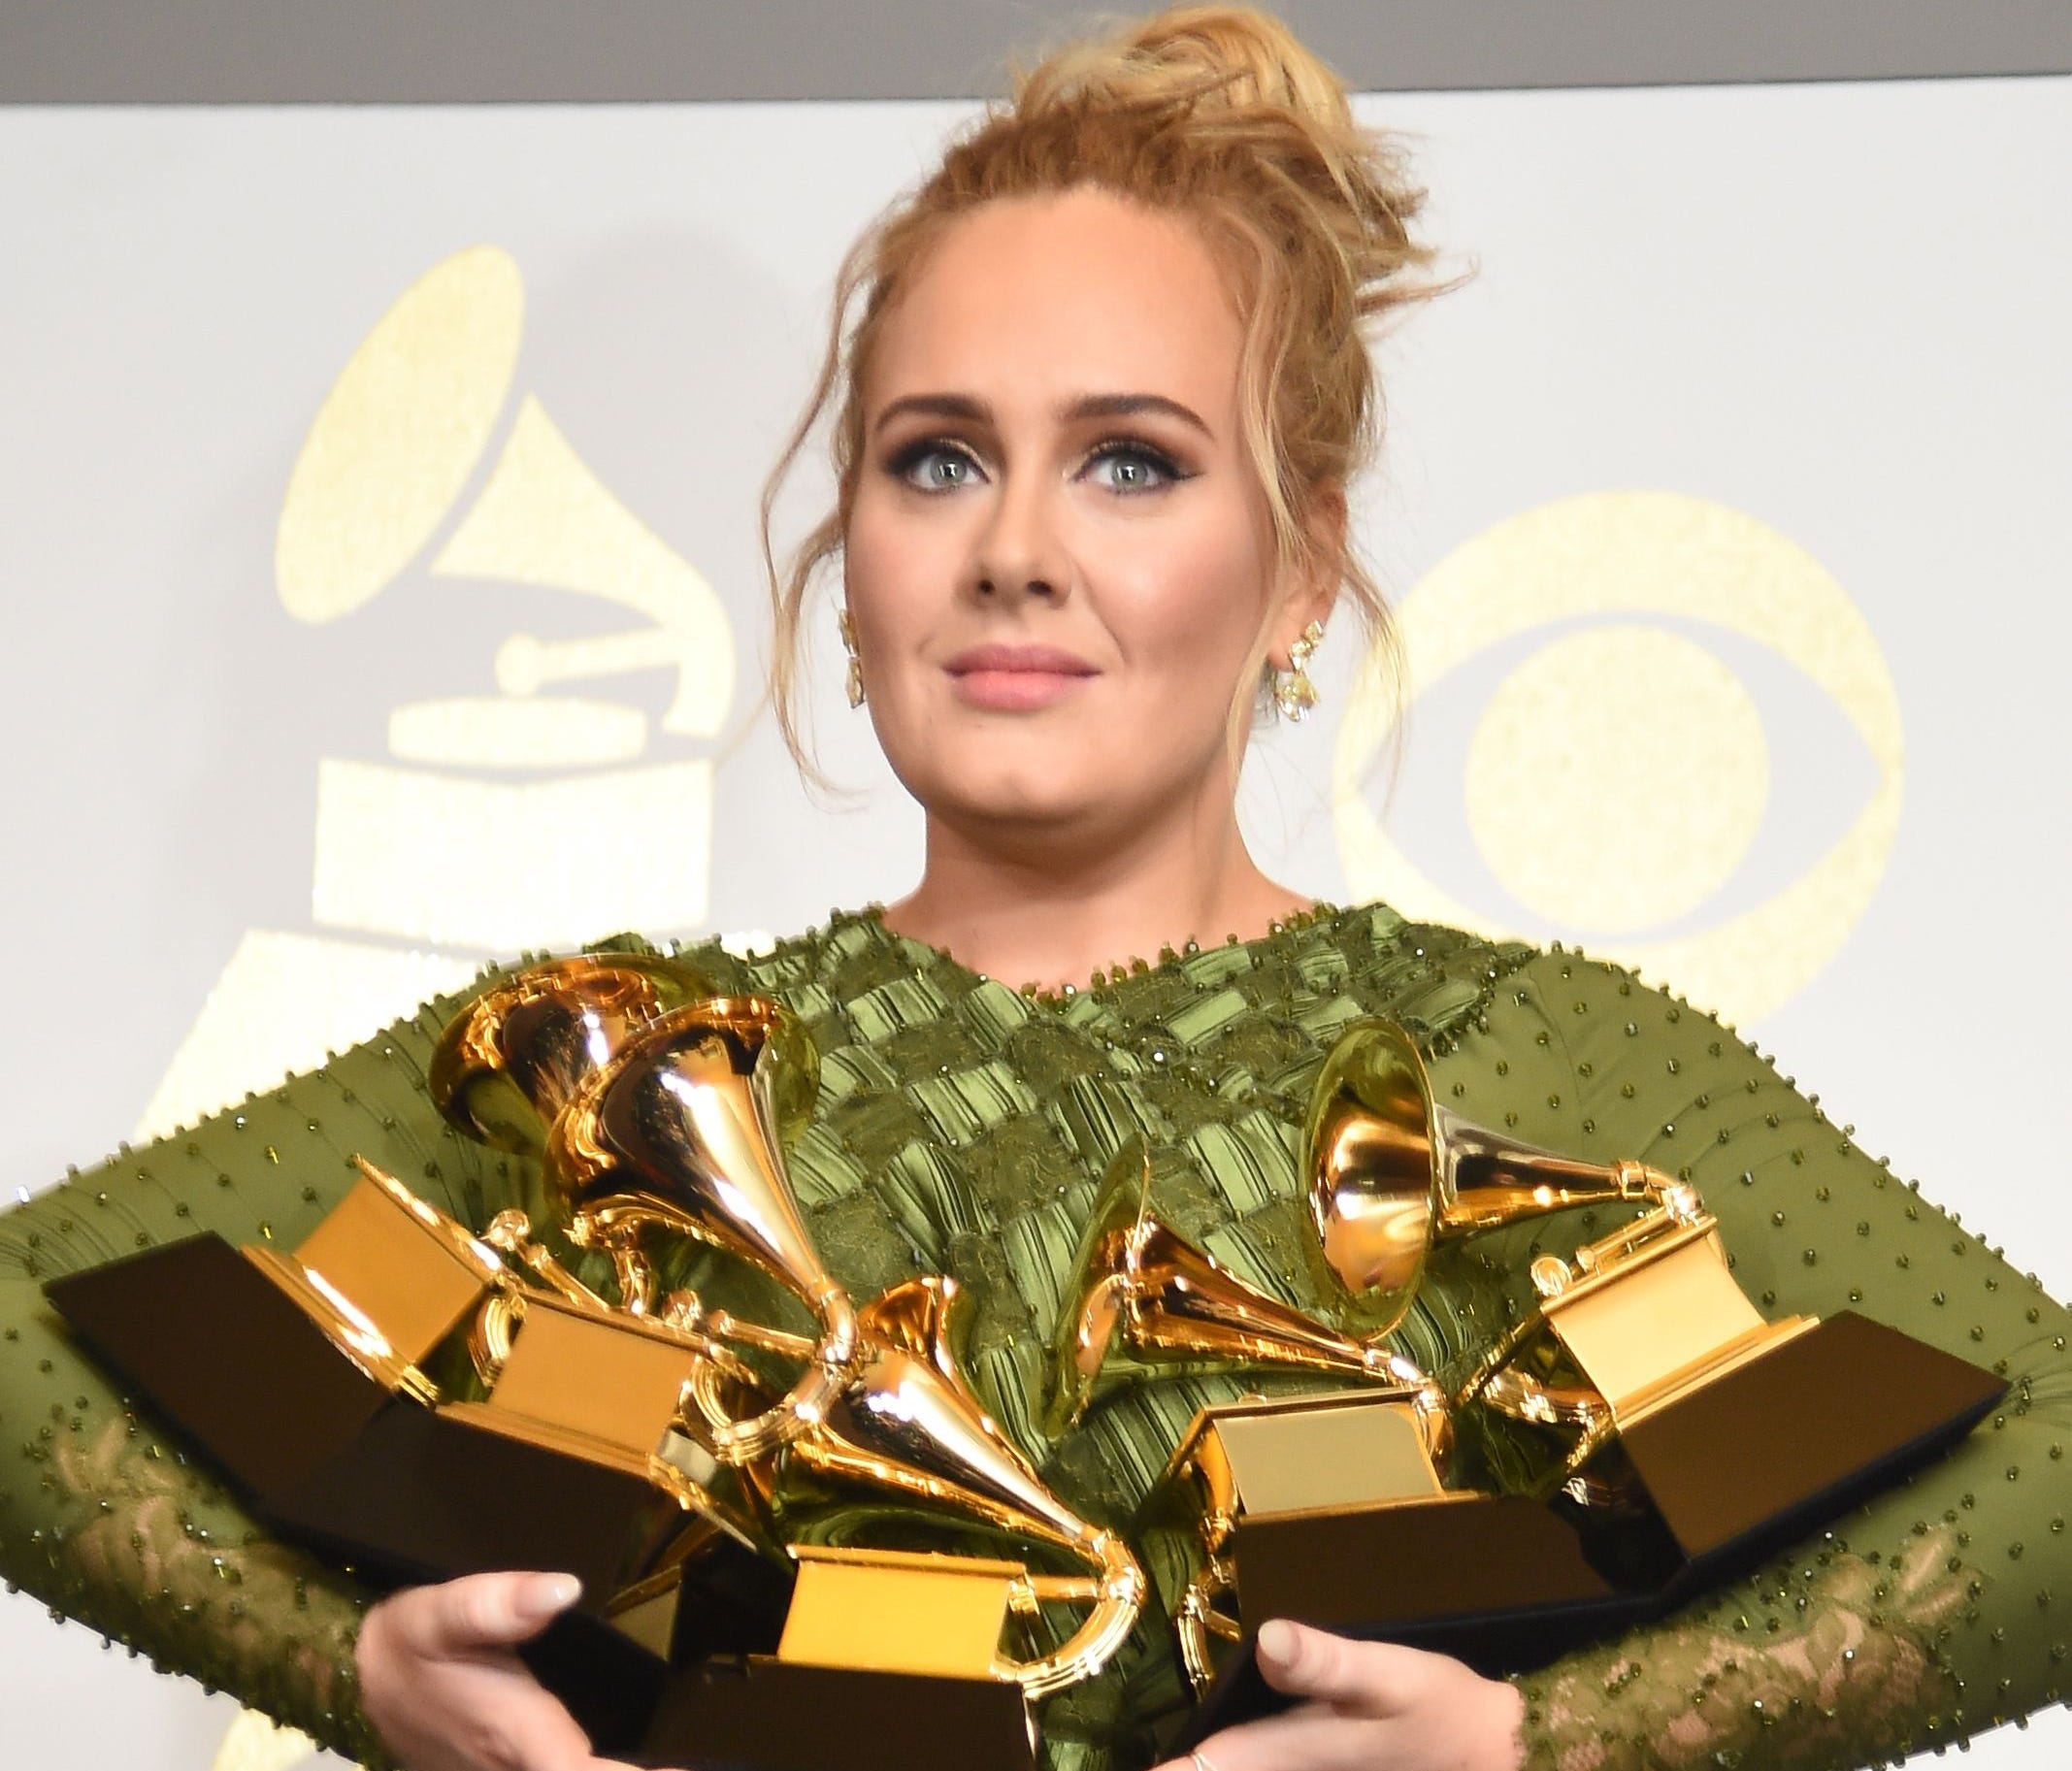 Adele poses in the press room with her trophies, including the top two Grammys of Album and Record of the Year for her blockbuster hit 